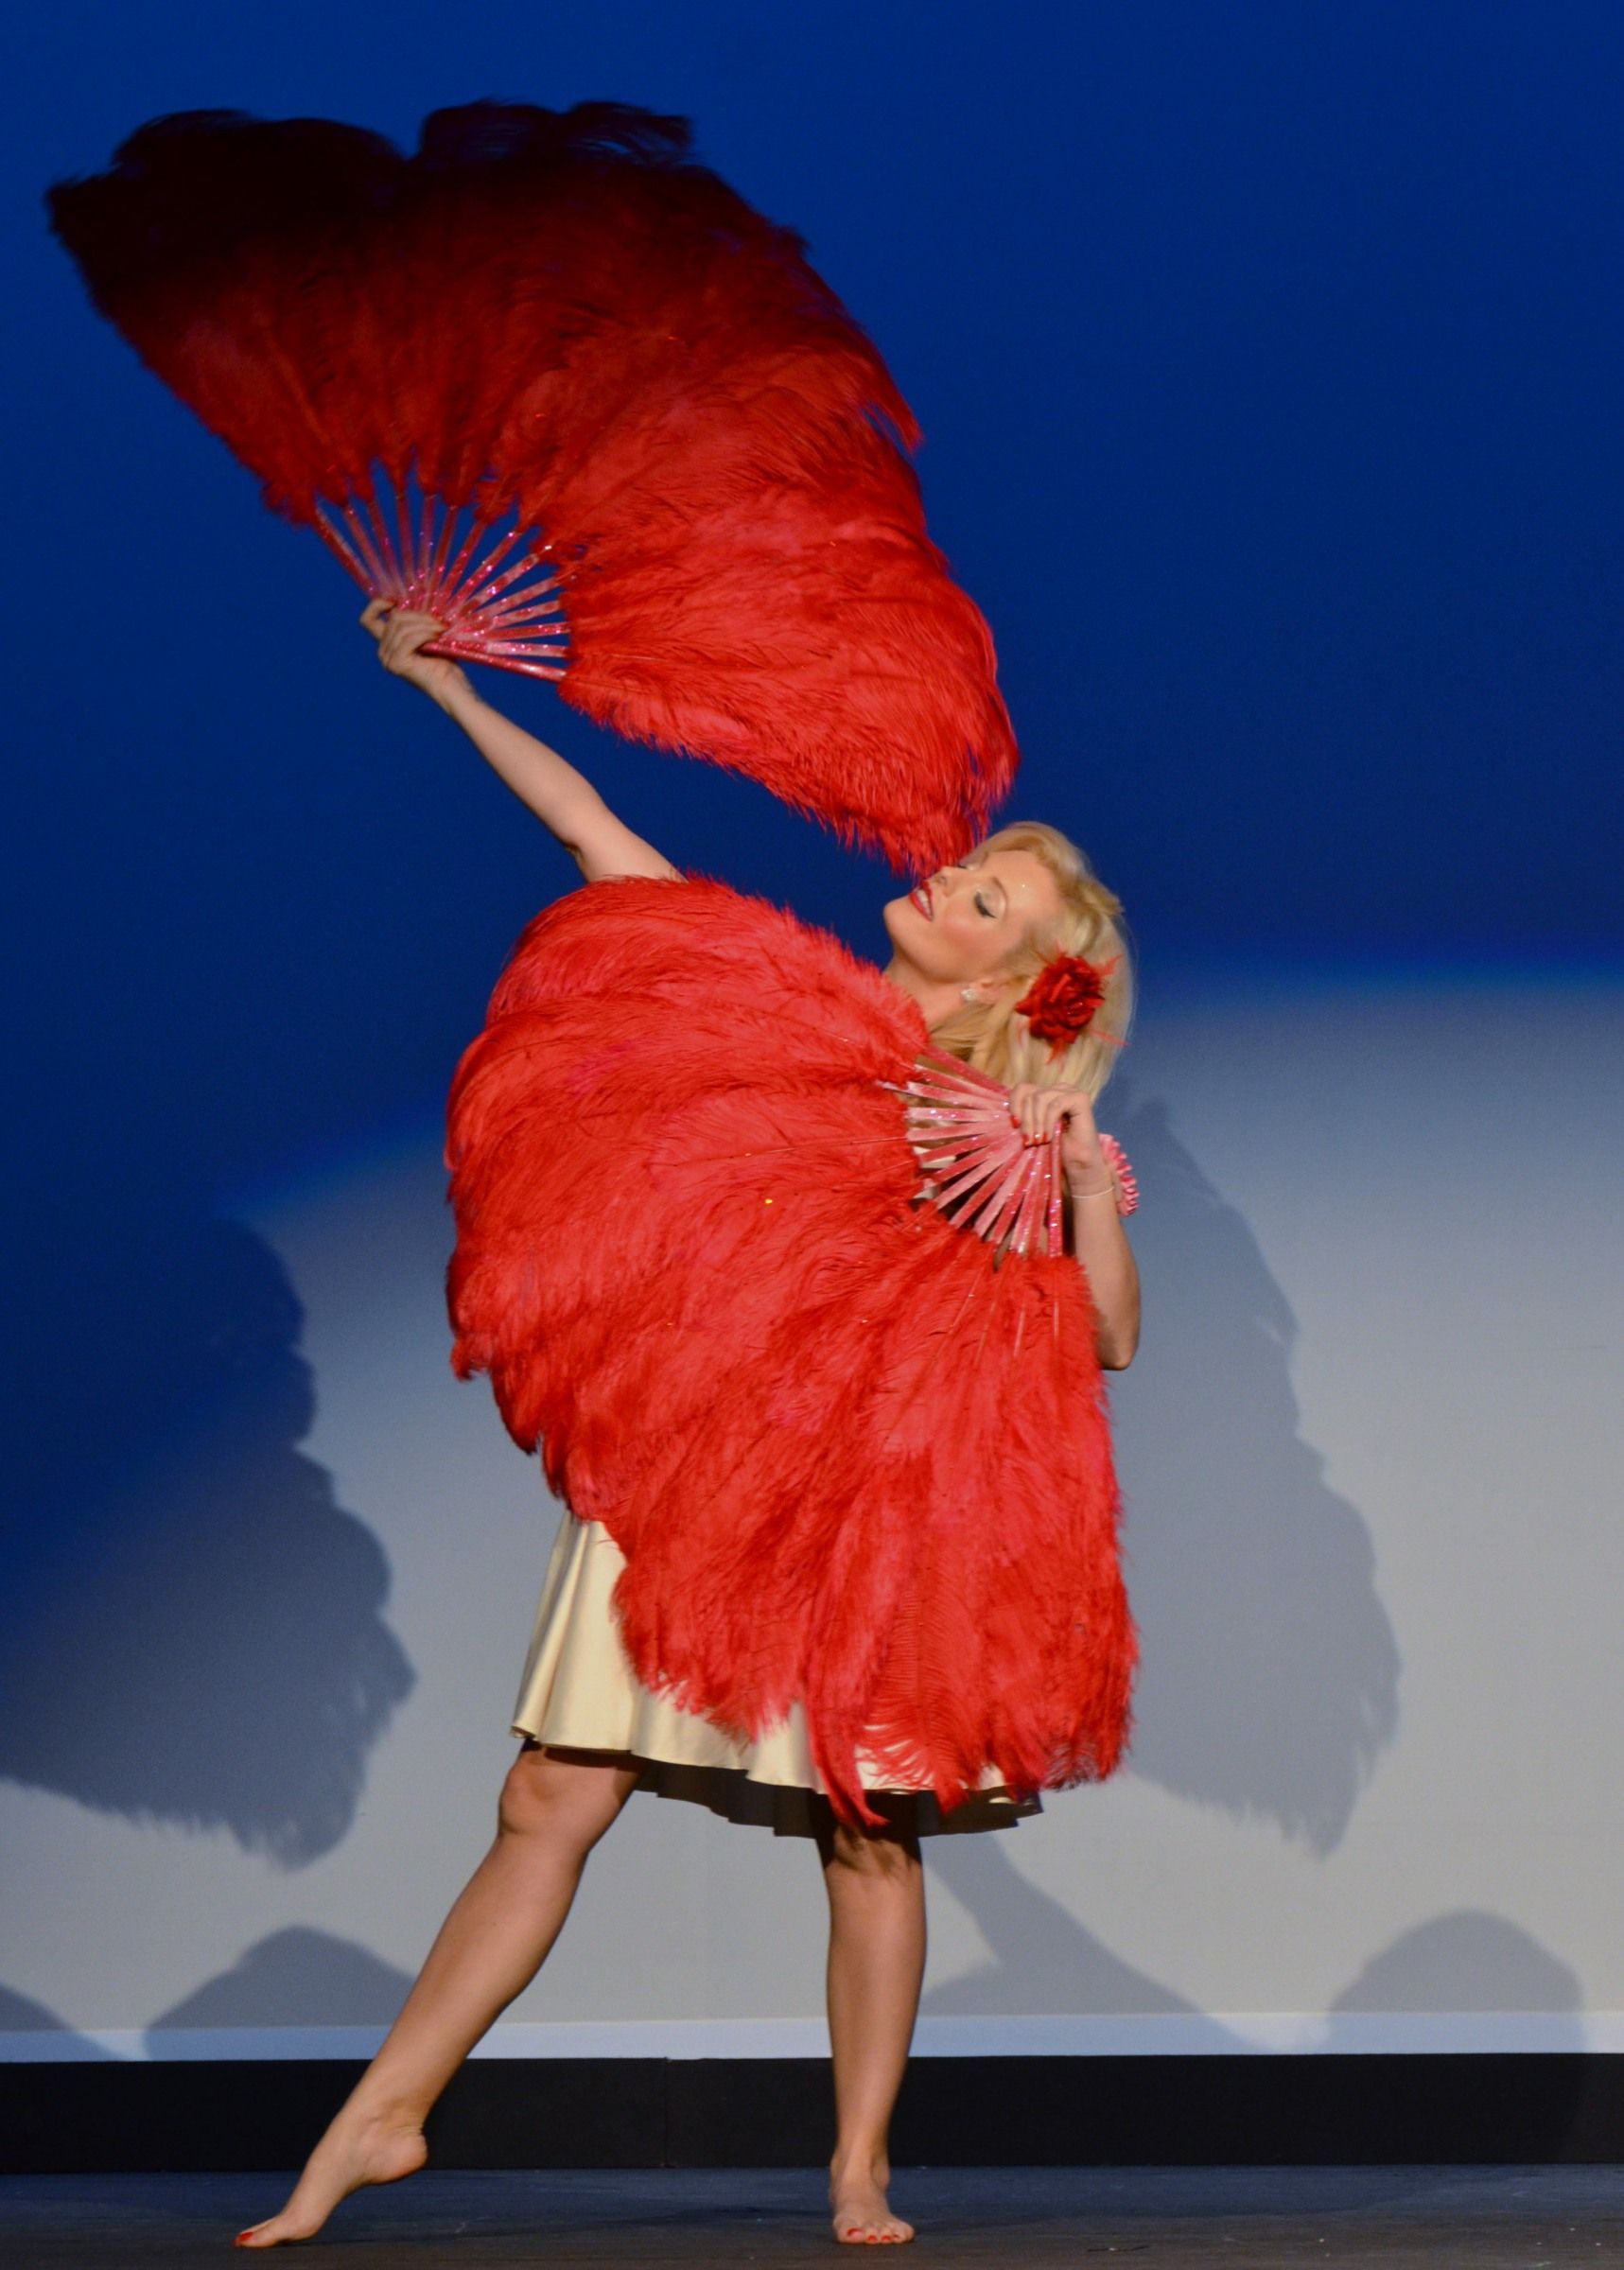 feathered kisses act dancing with large red feather hand fans